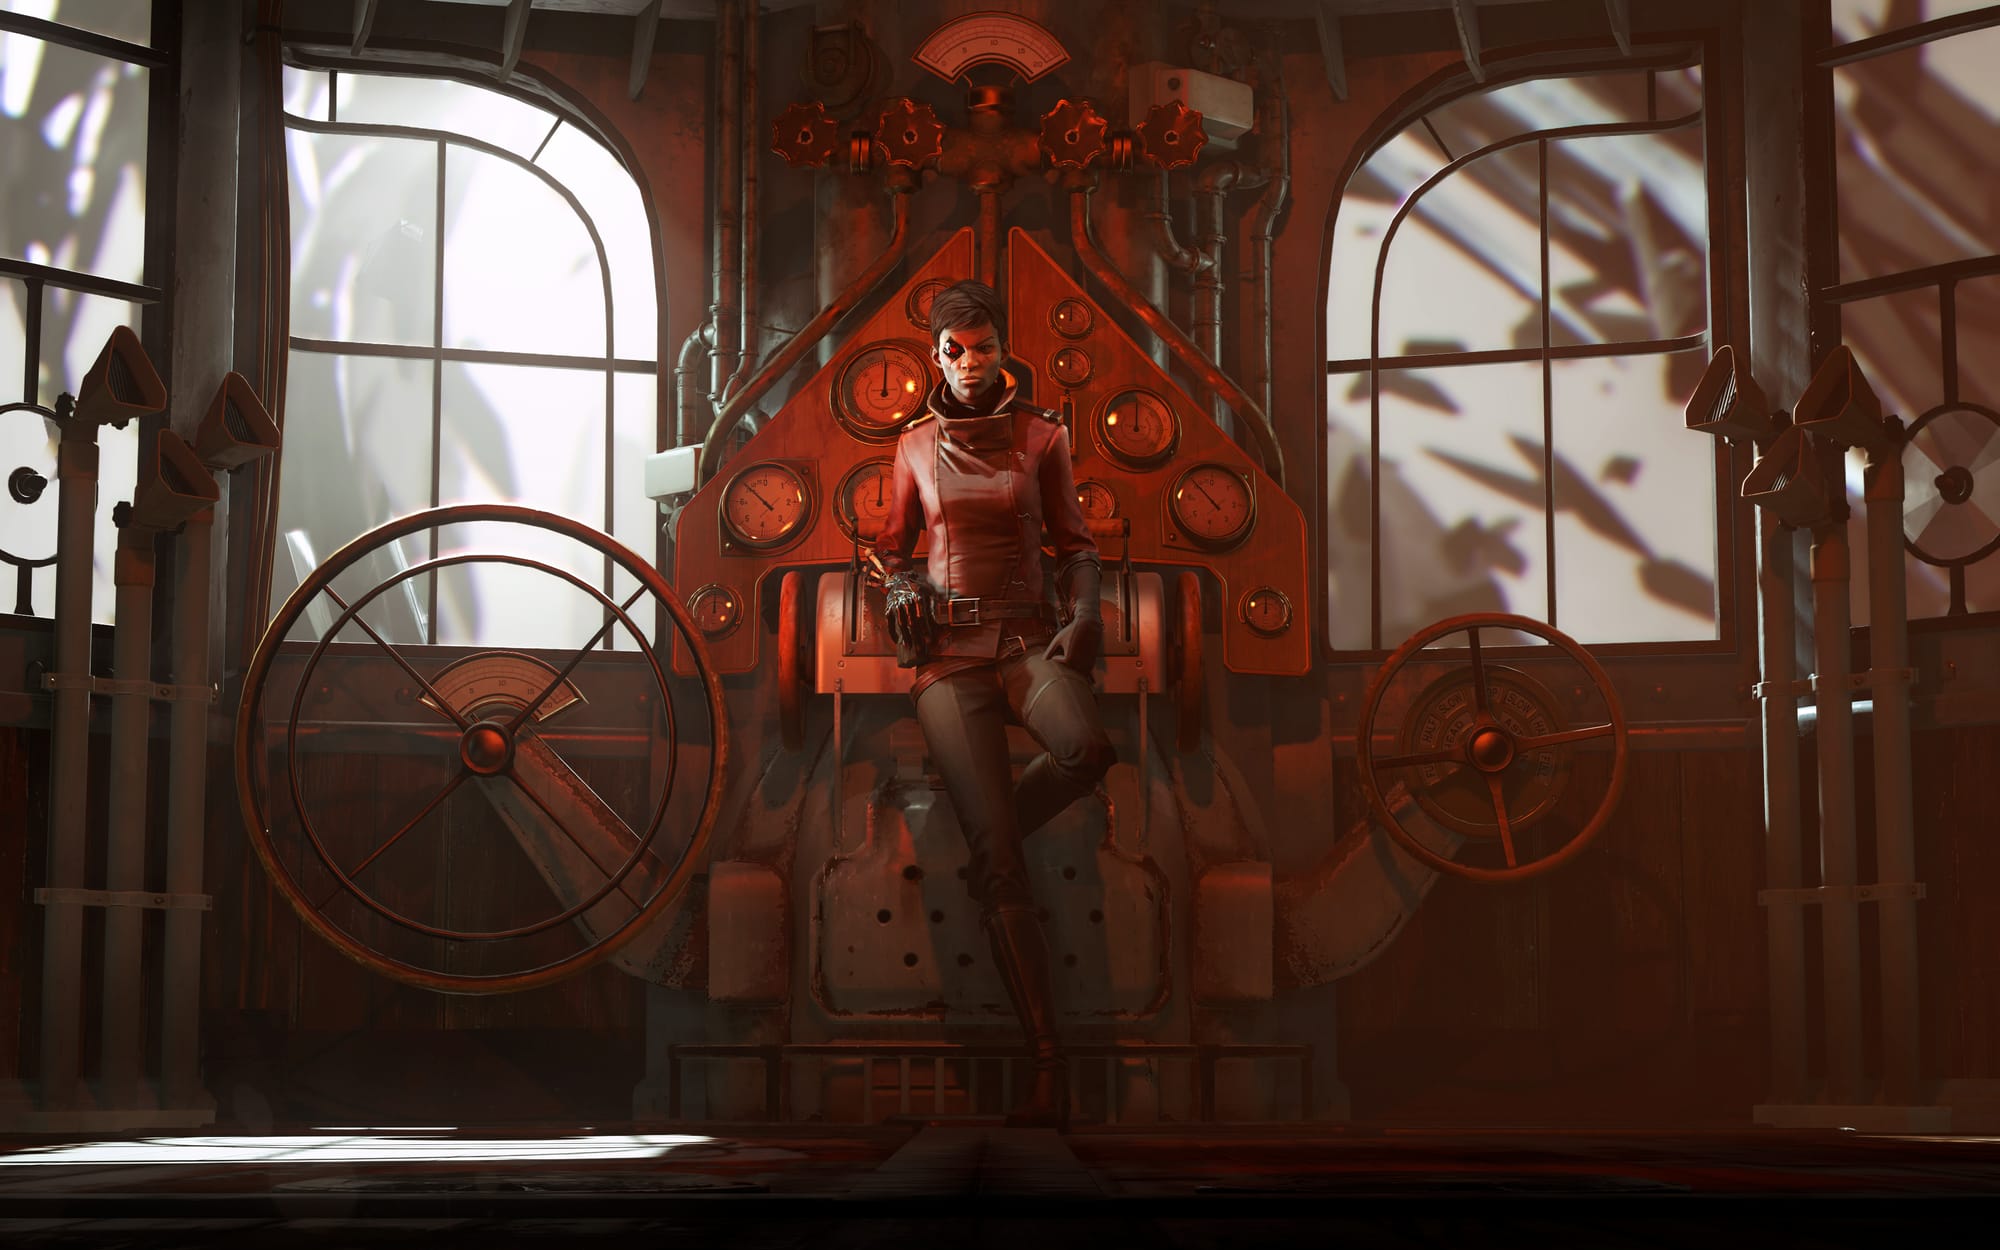 Billie from Dishonored leaning up against a large mechanical contraption with wheels and gears.